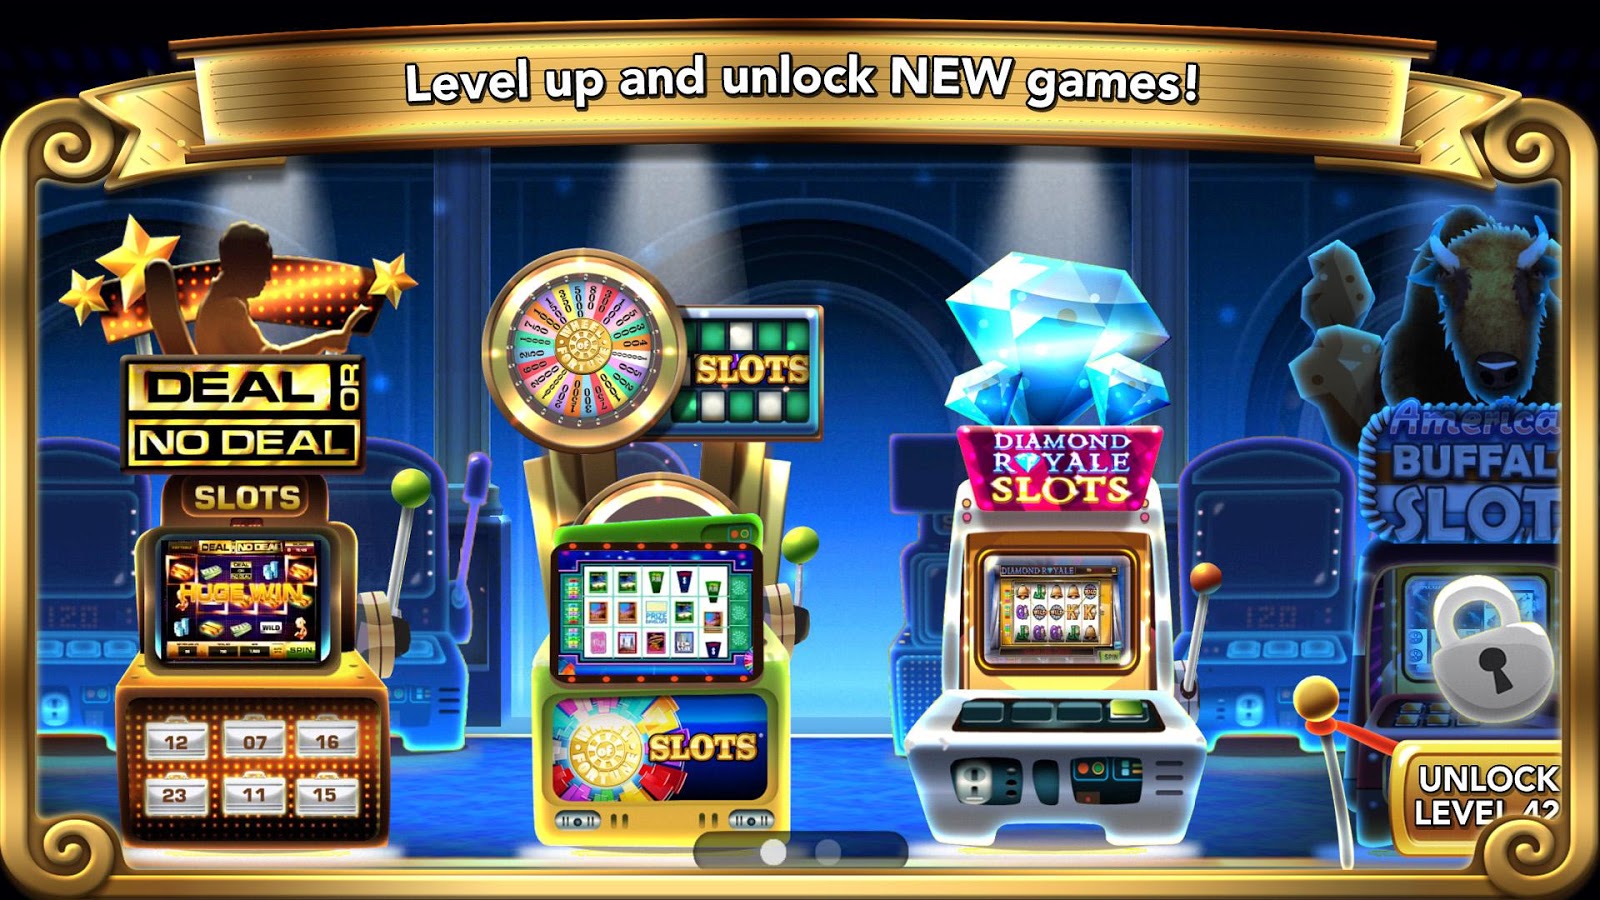 GSN Grand Casino - FREE Slots - Android Apps on Google Play1600 x 900